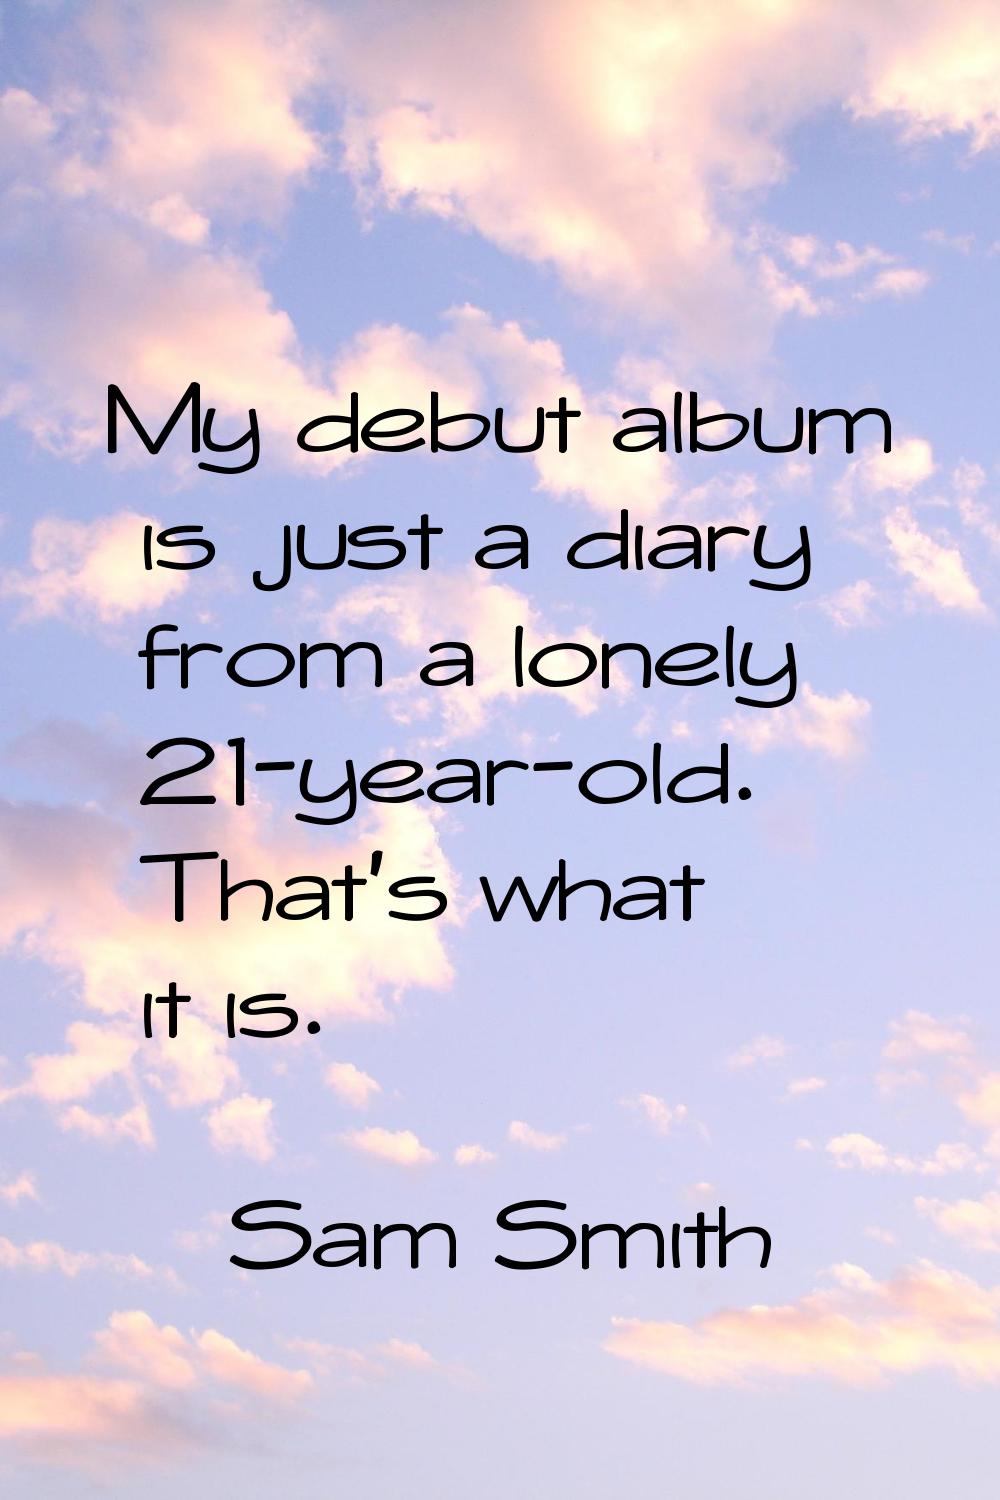 My debut album is just a diary from a lonely 21-year-old. That's what it is.